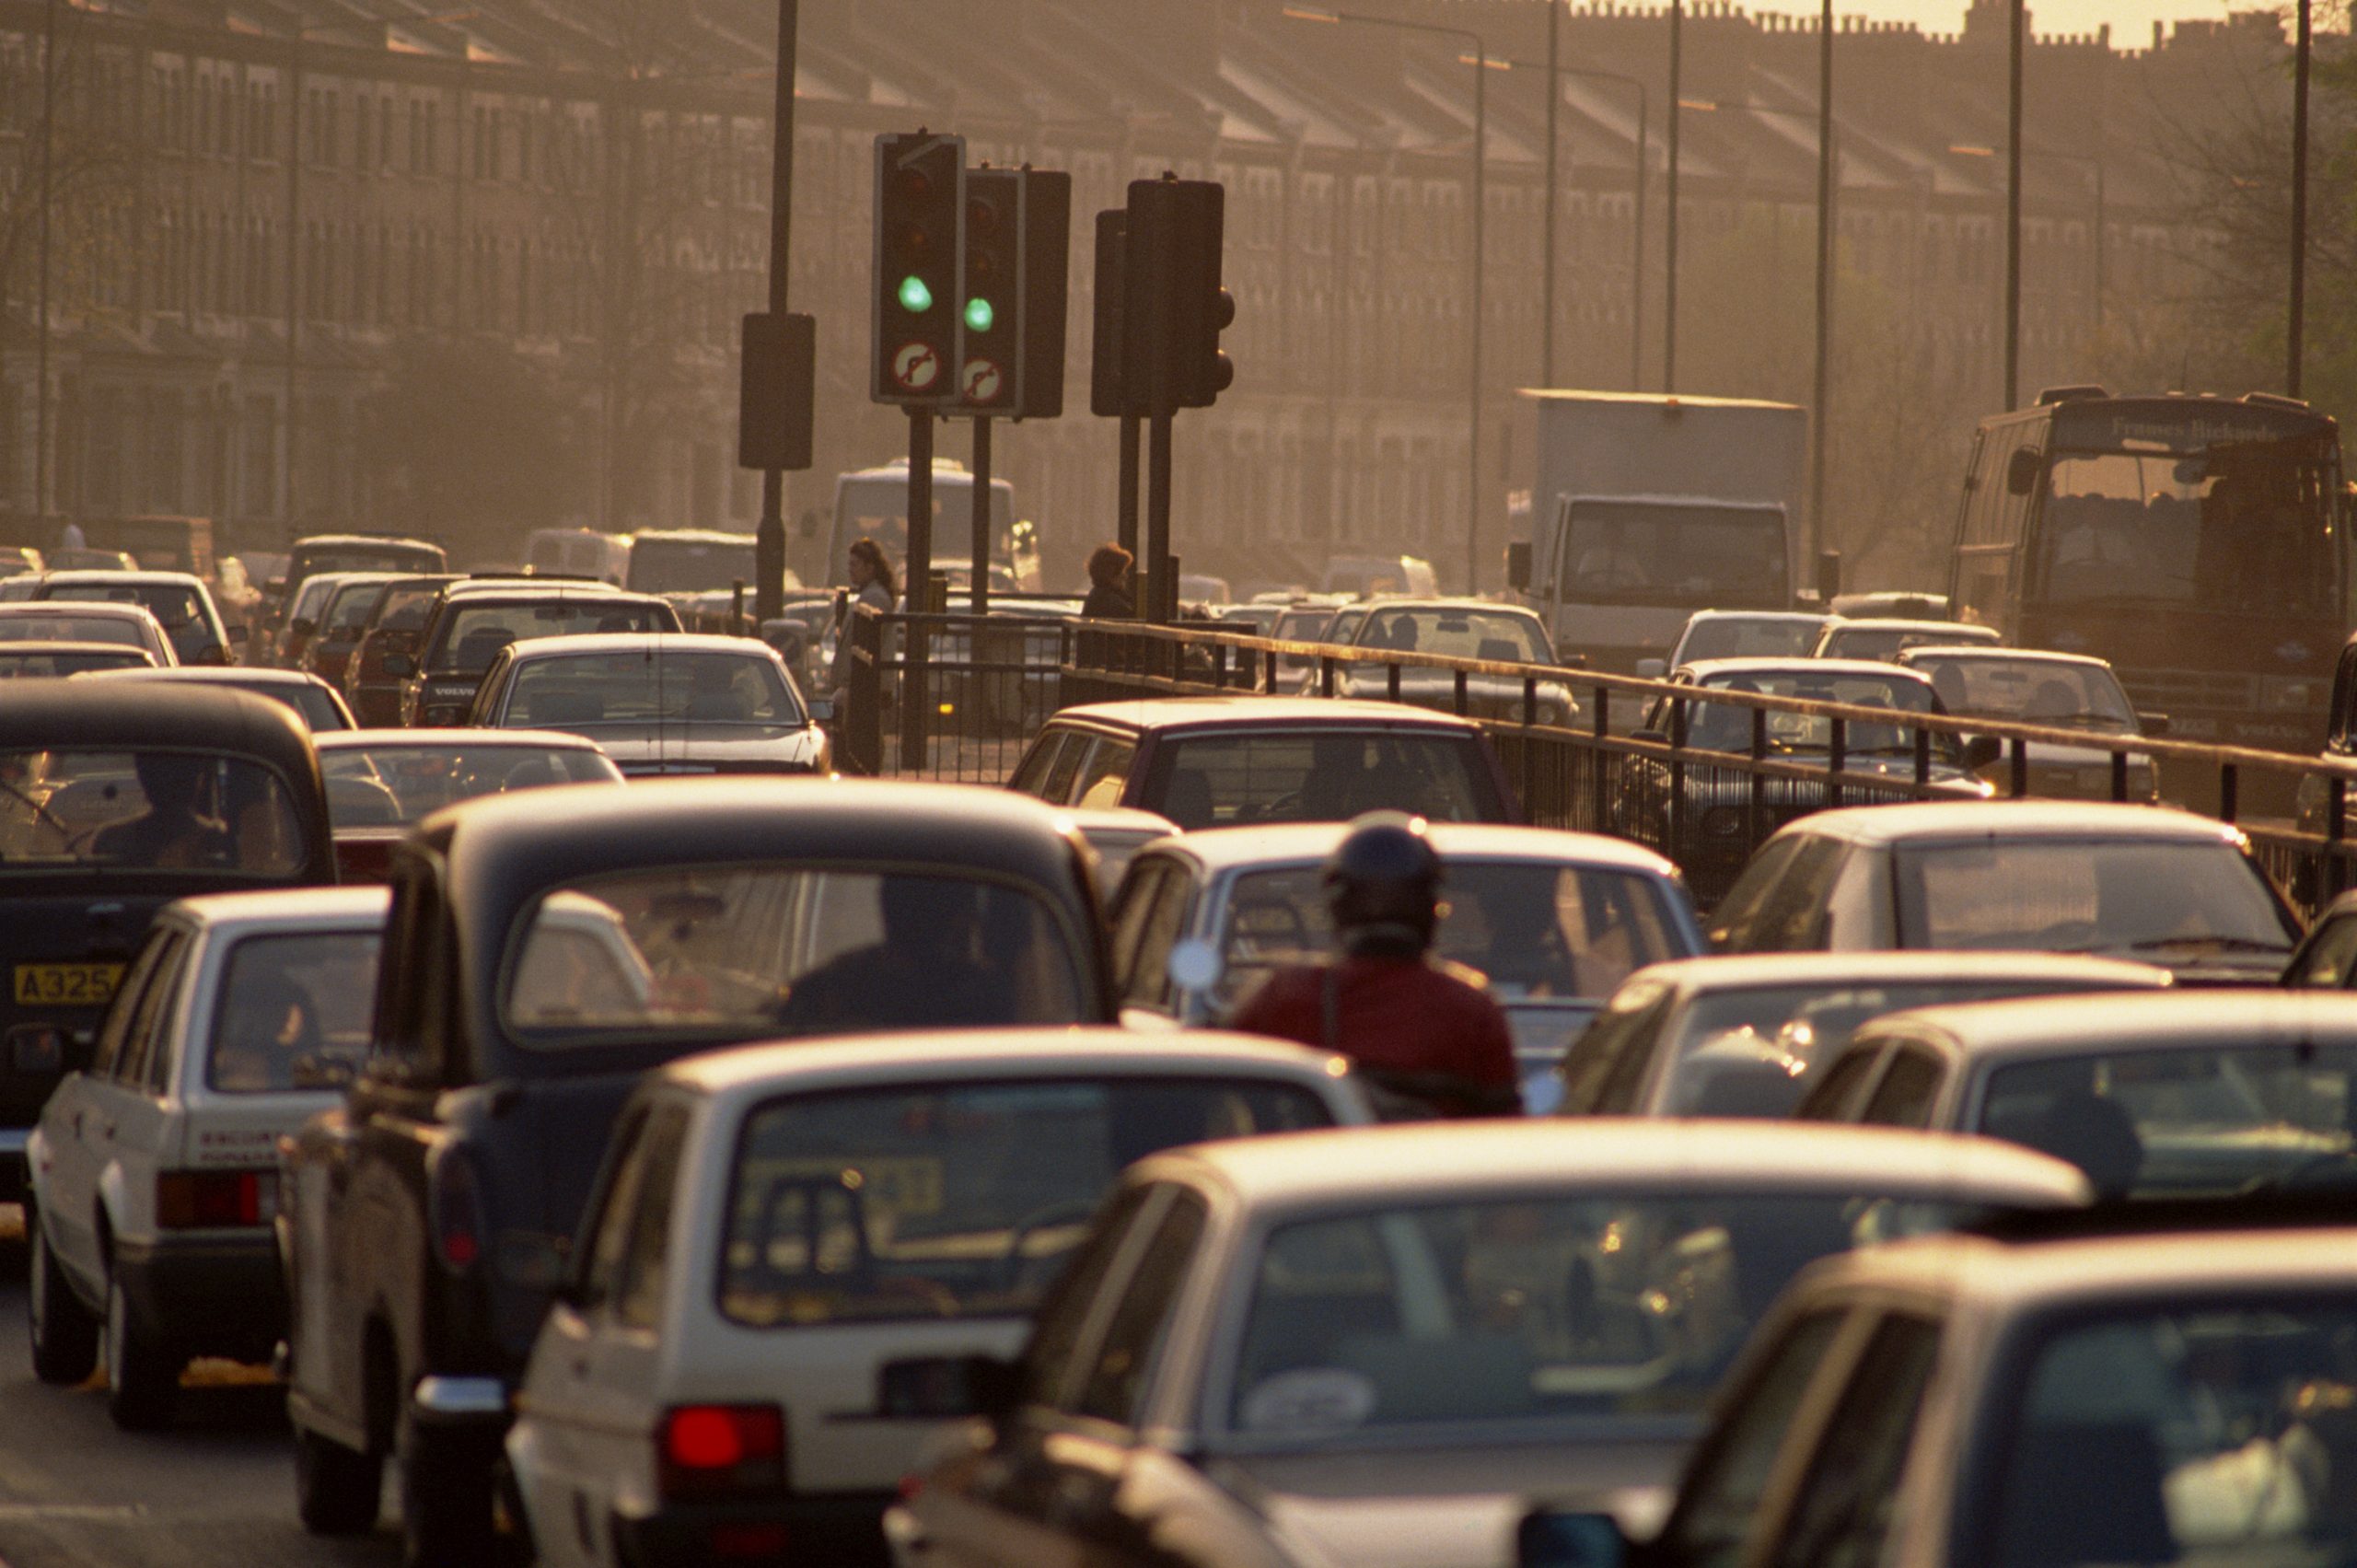 These are the world's busiest cities for car traffic